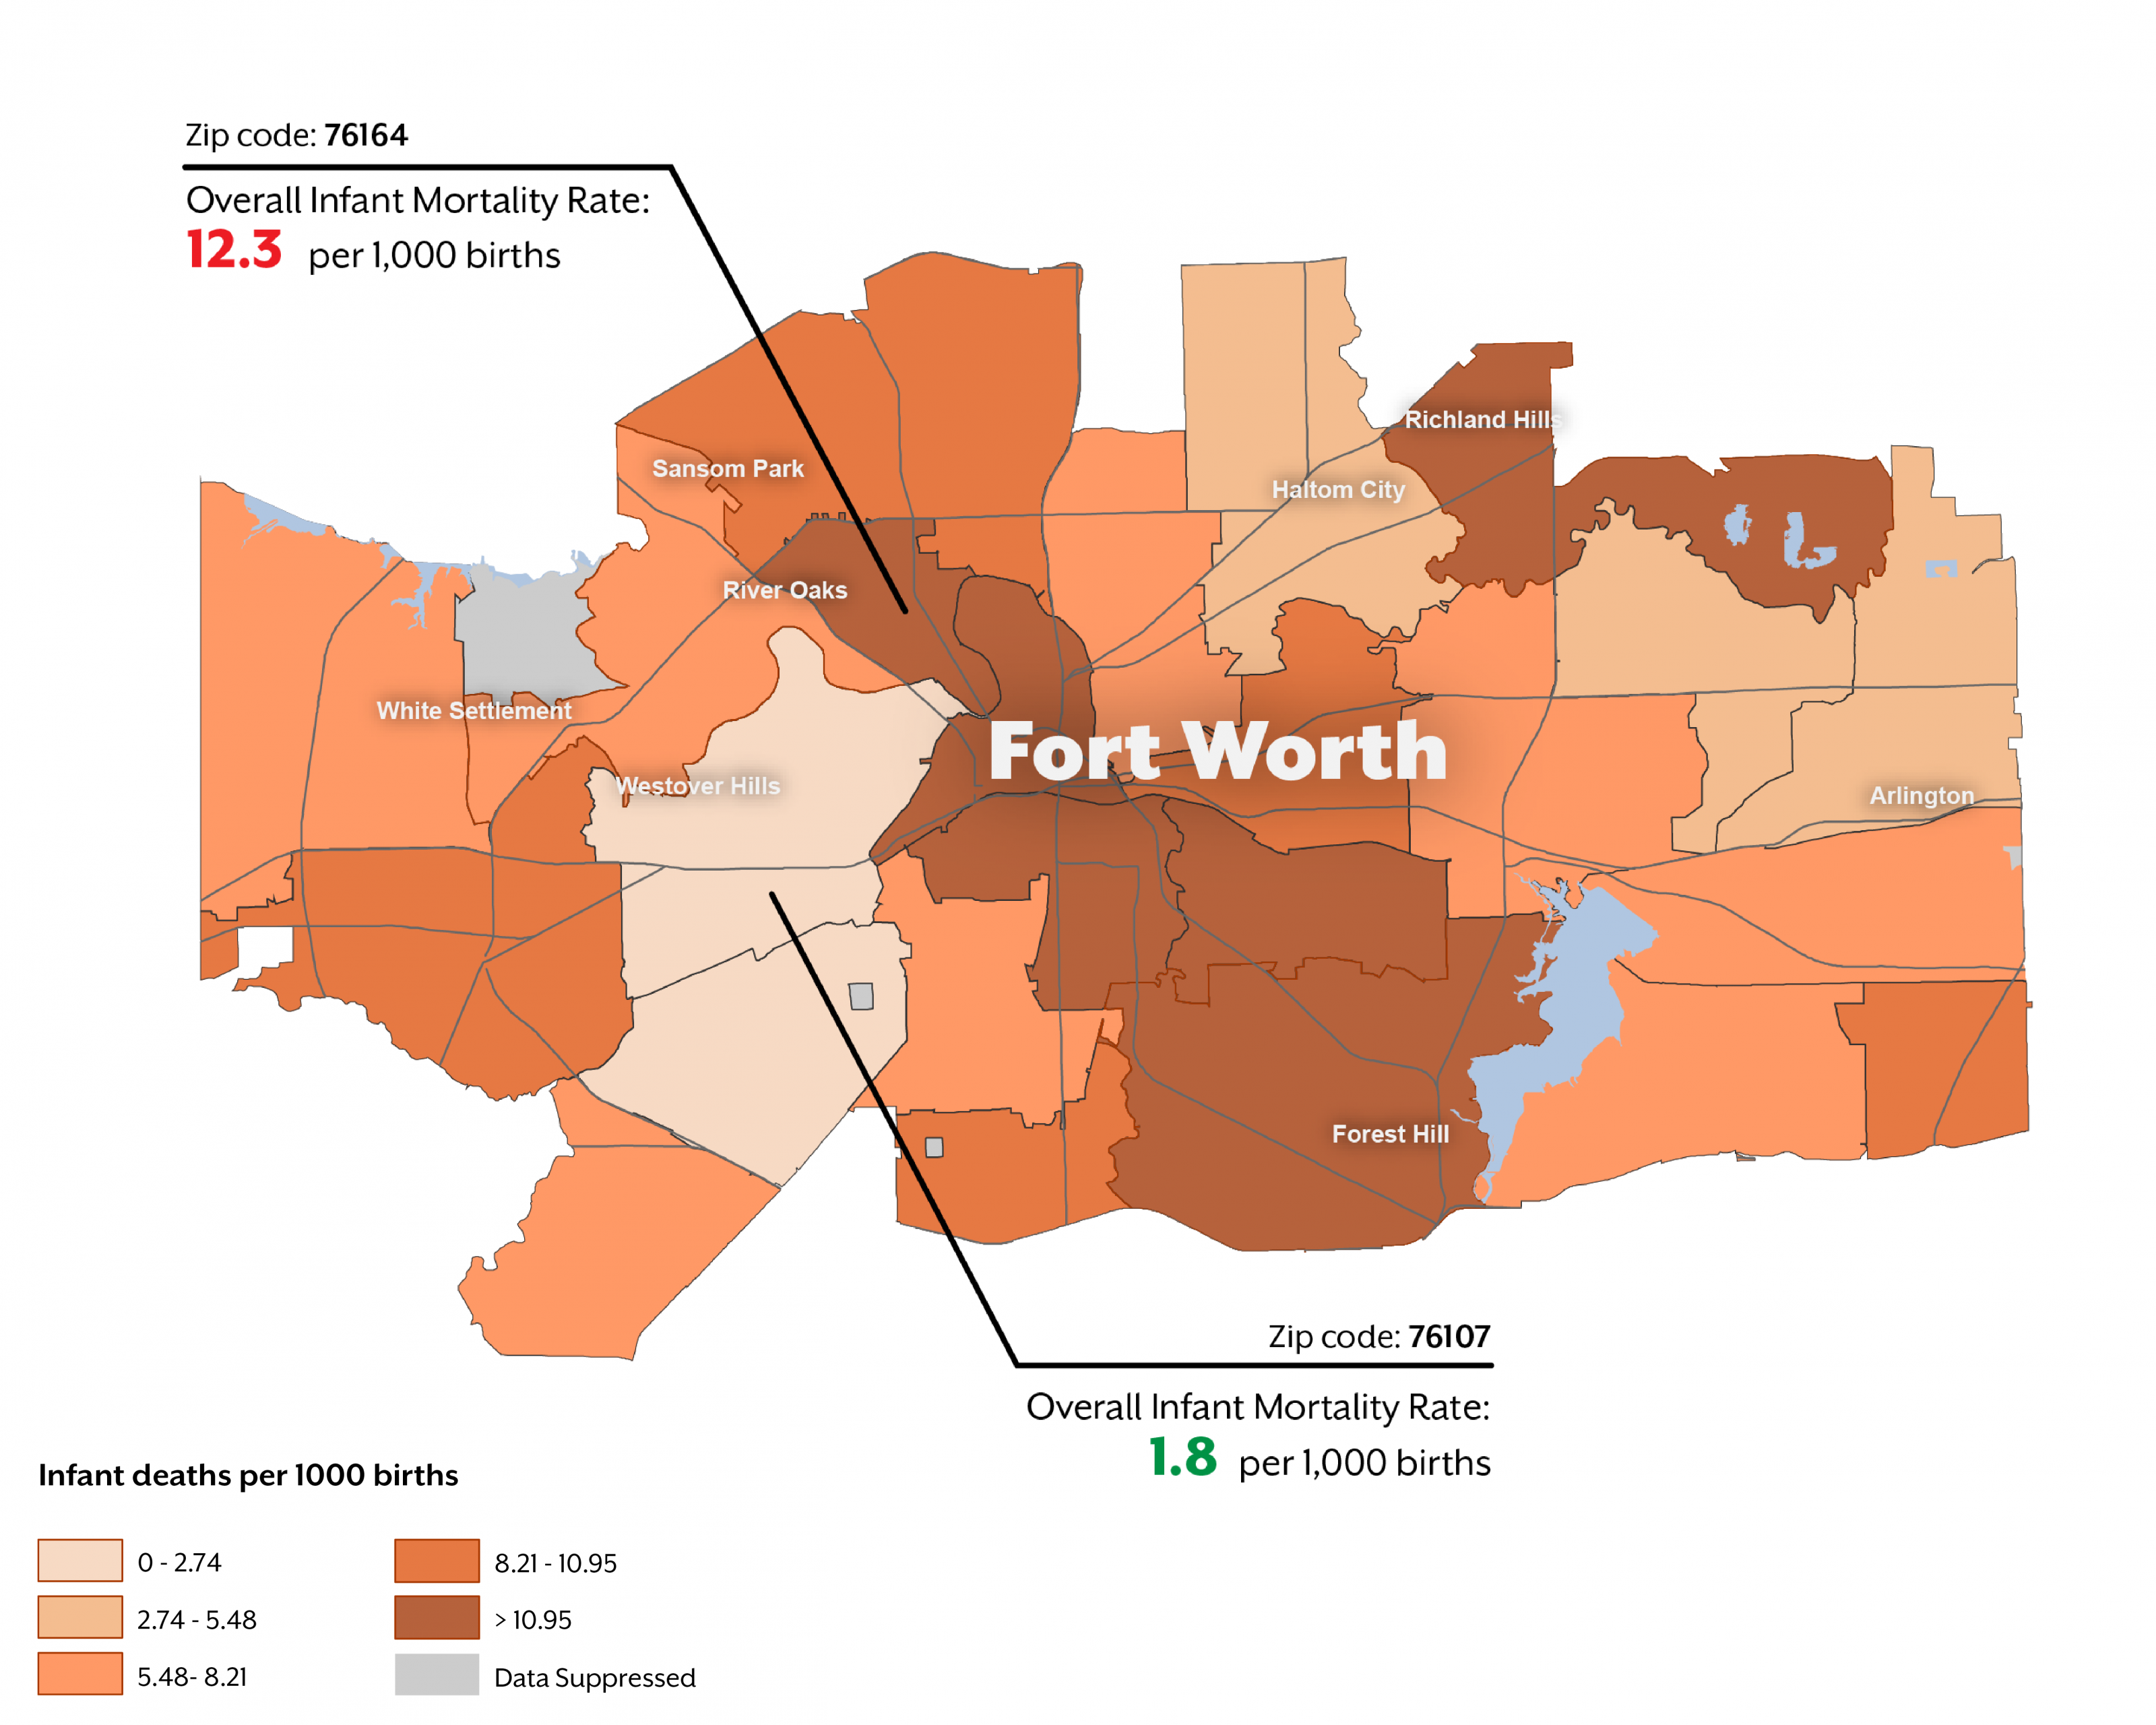 IMR Rates in Forth worth